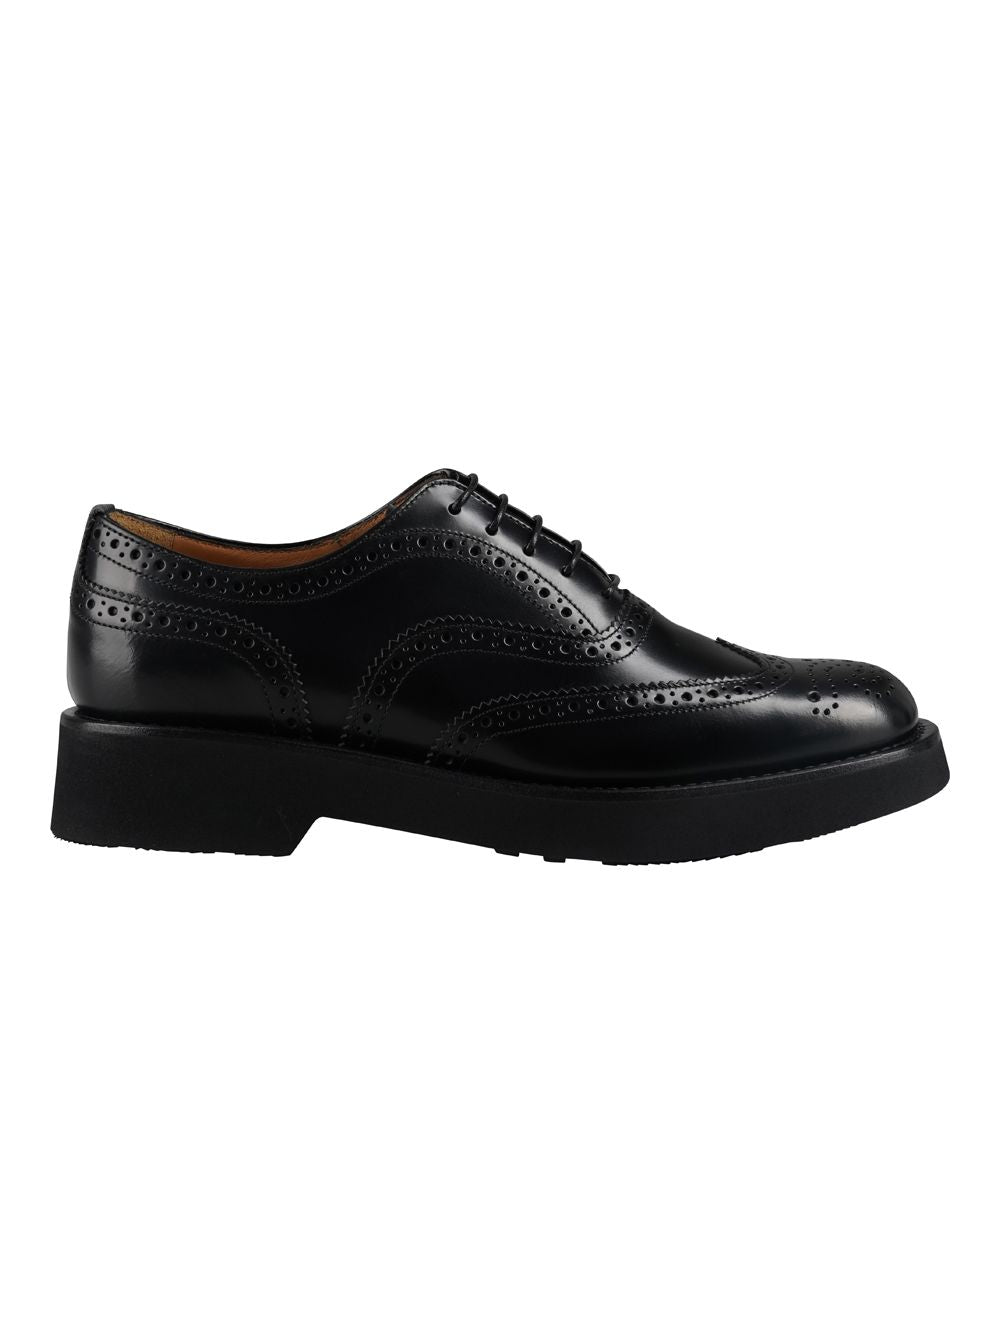 Shop Church's Perforated Leather Oxford Shoes For Women In Black